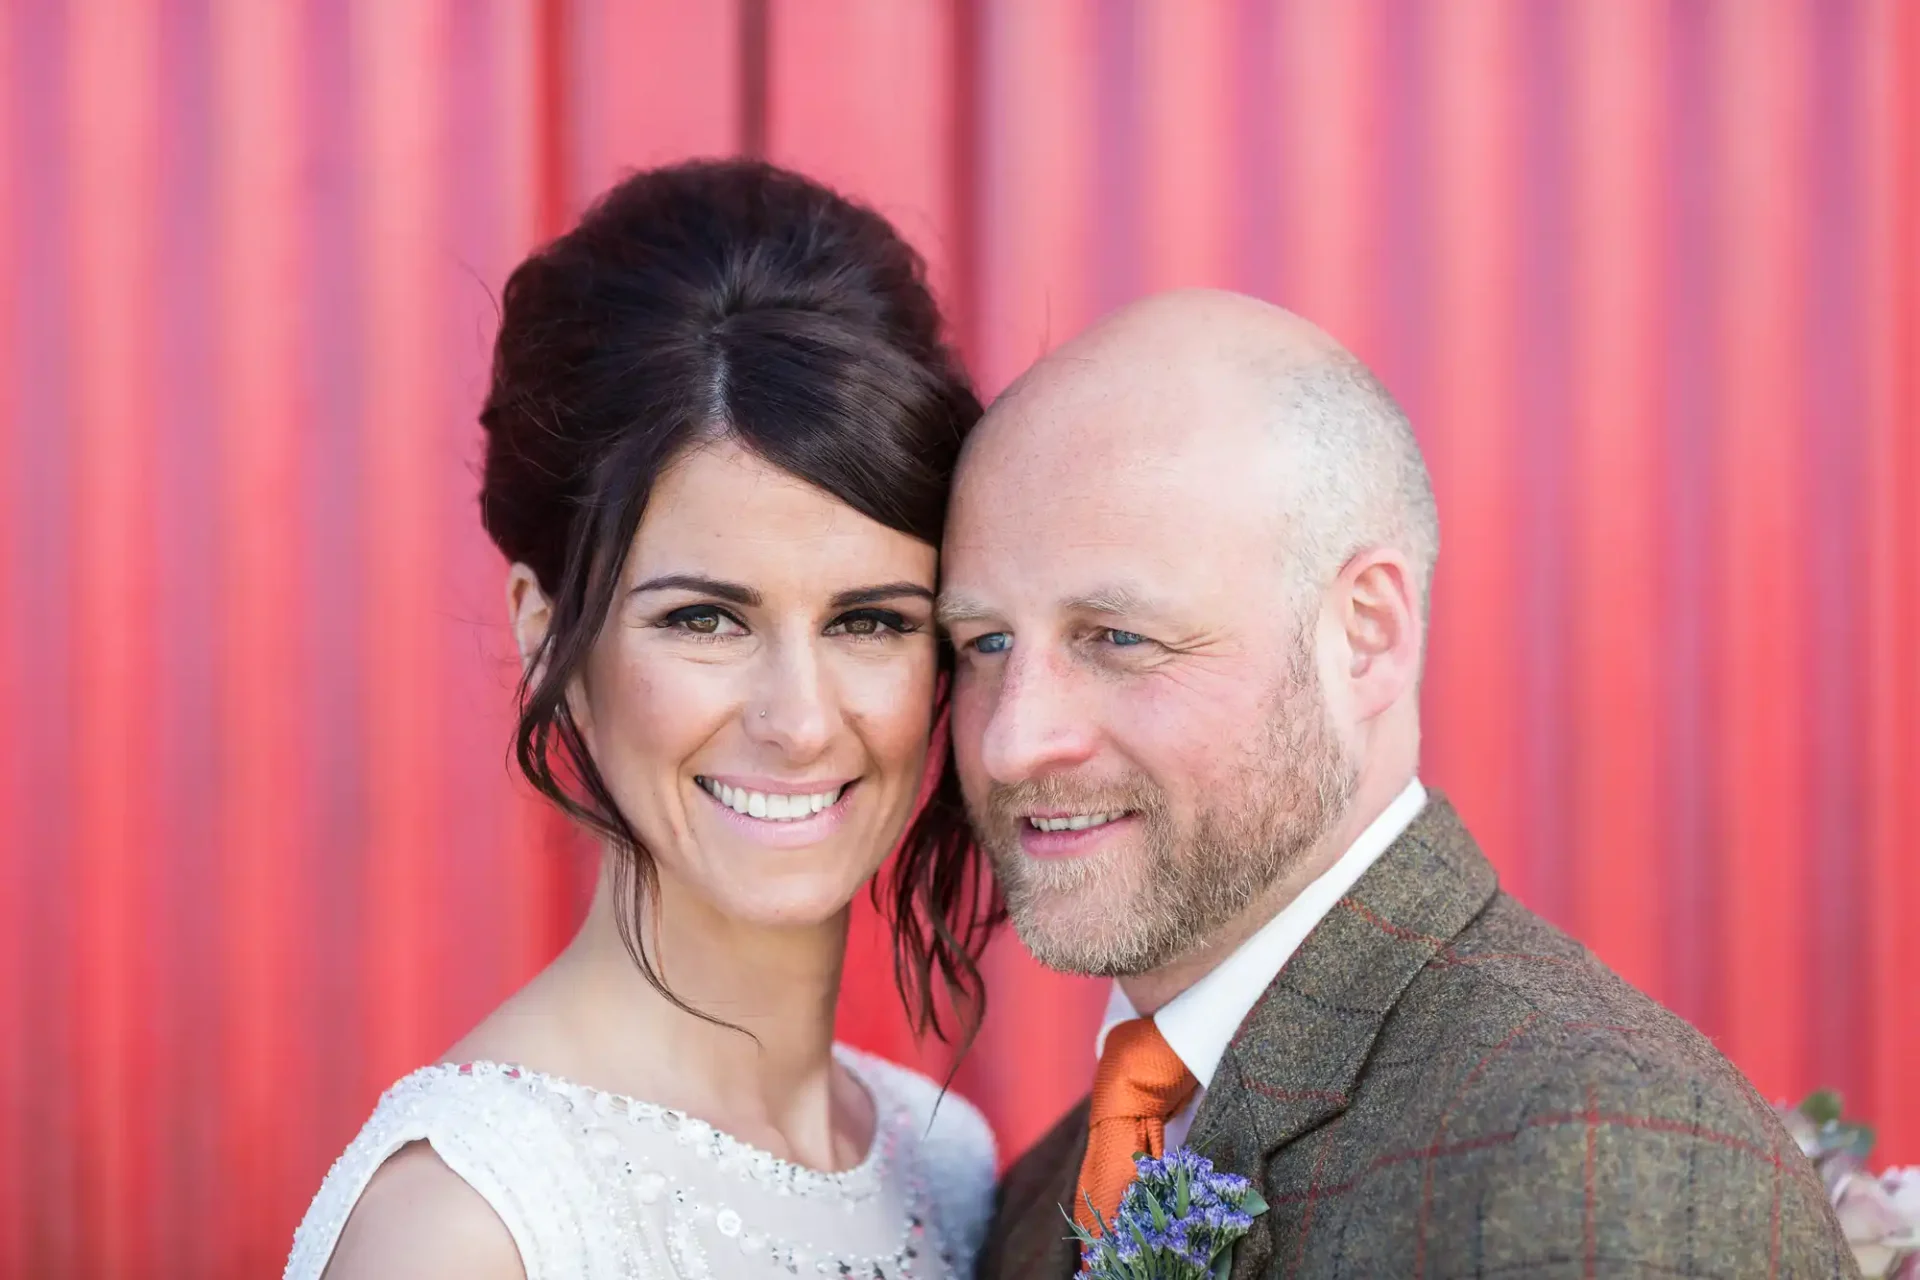 A smiling bride and groom posing in front of a red corrugated metal wall, the bride in a white dress and the groom in a tweed suit.